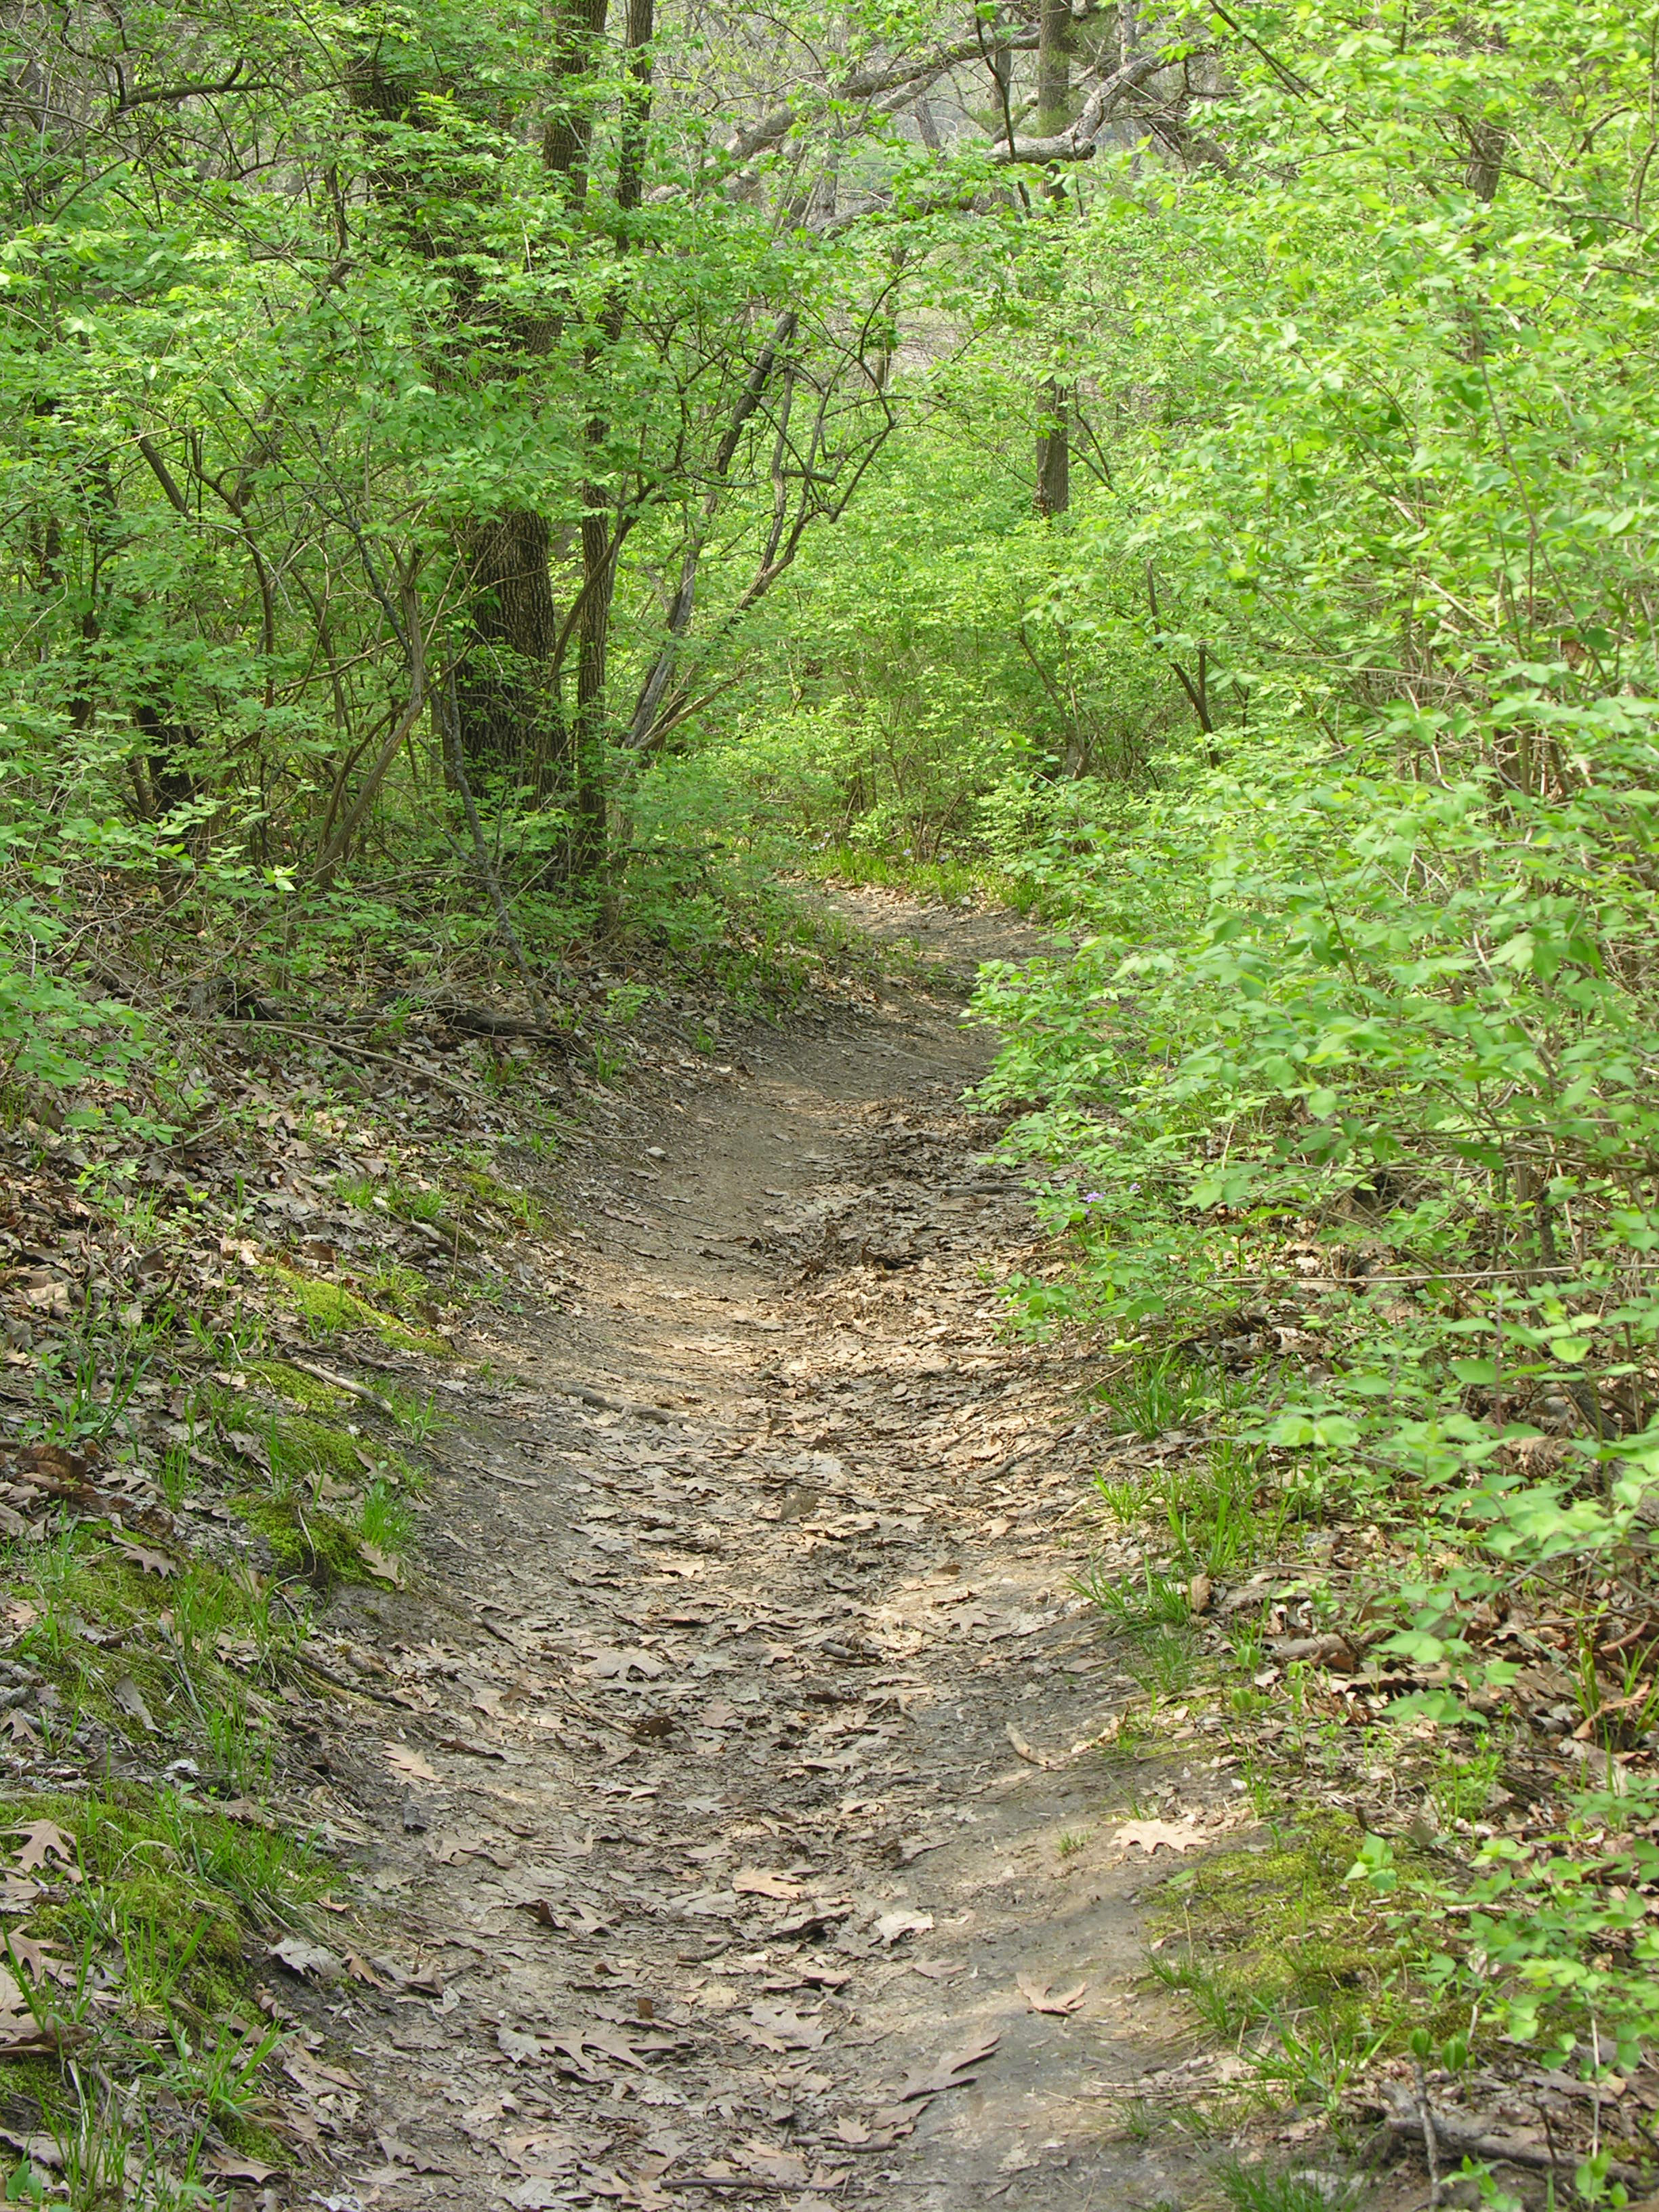 Trail through oak and hickory forest at Kaw River State Park.